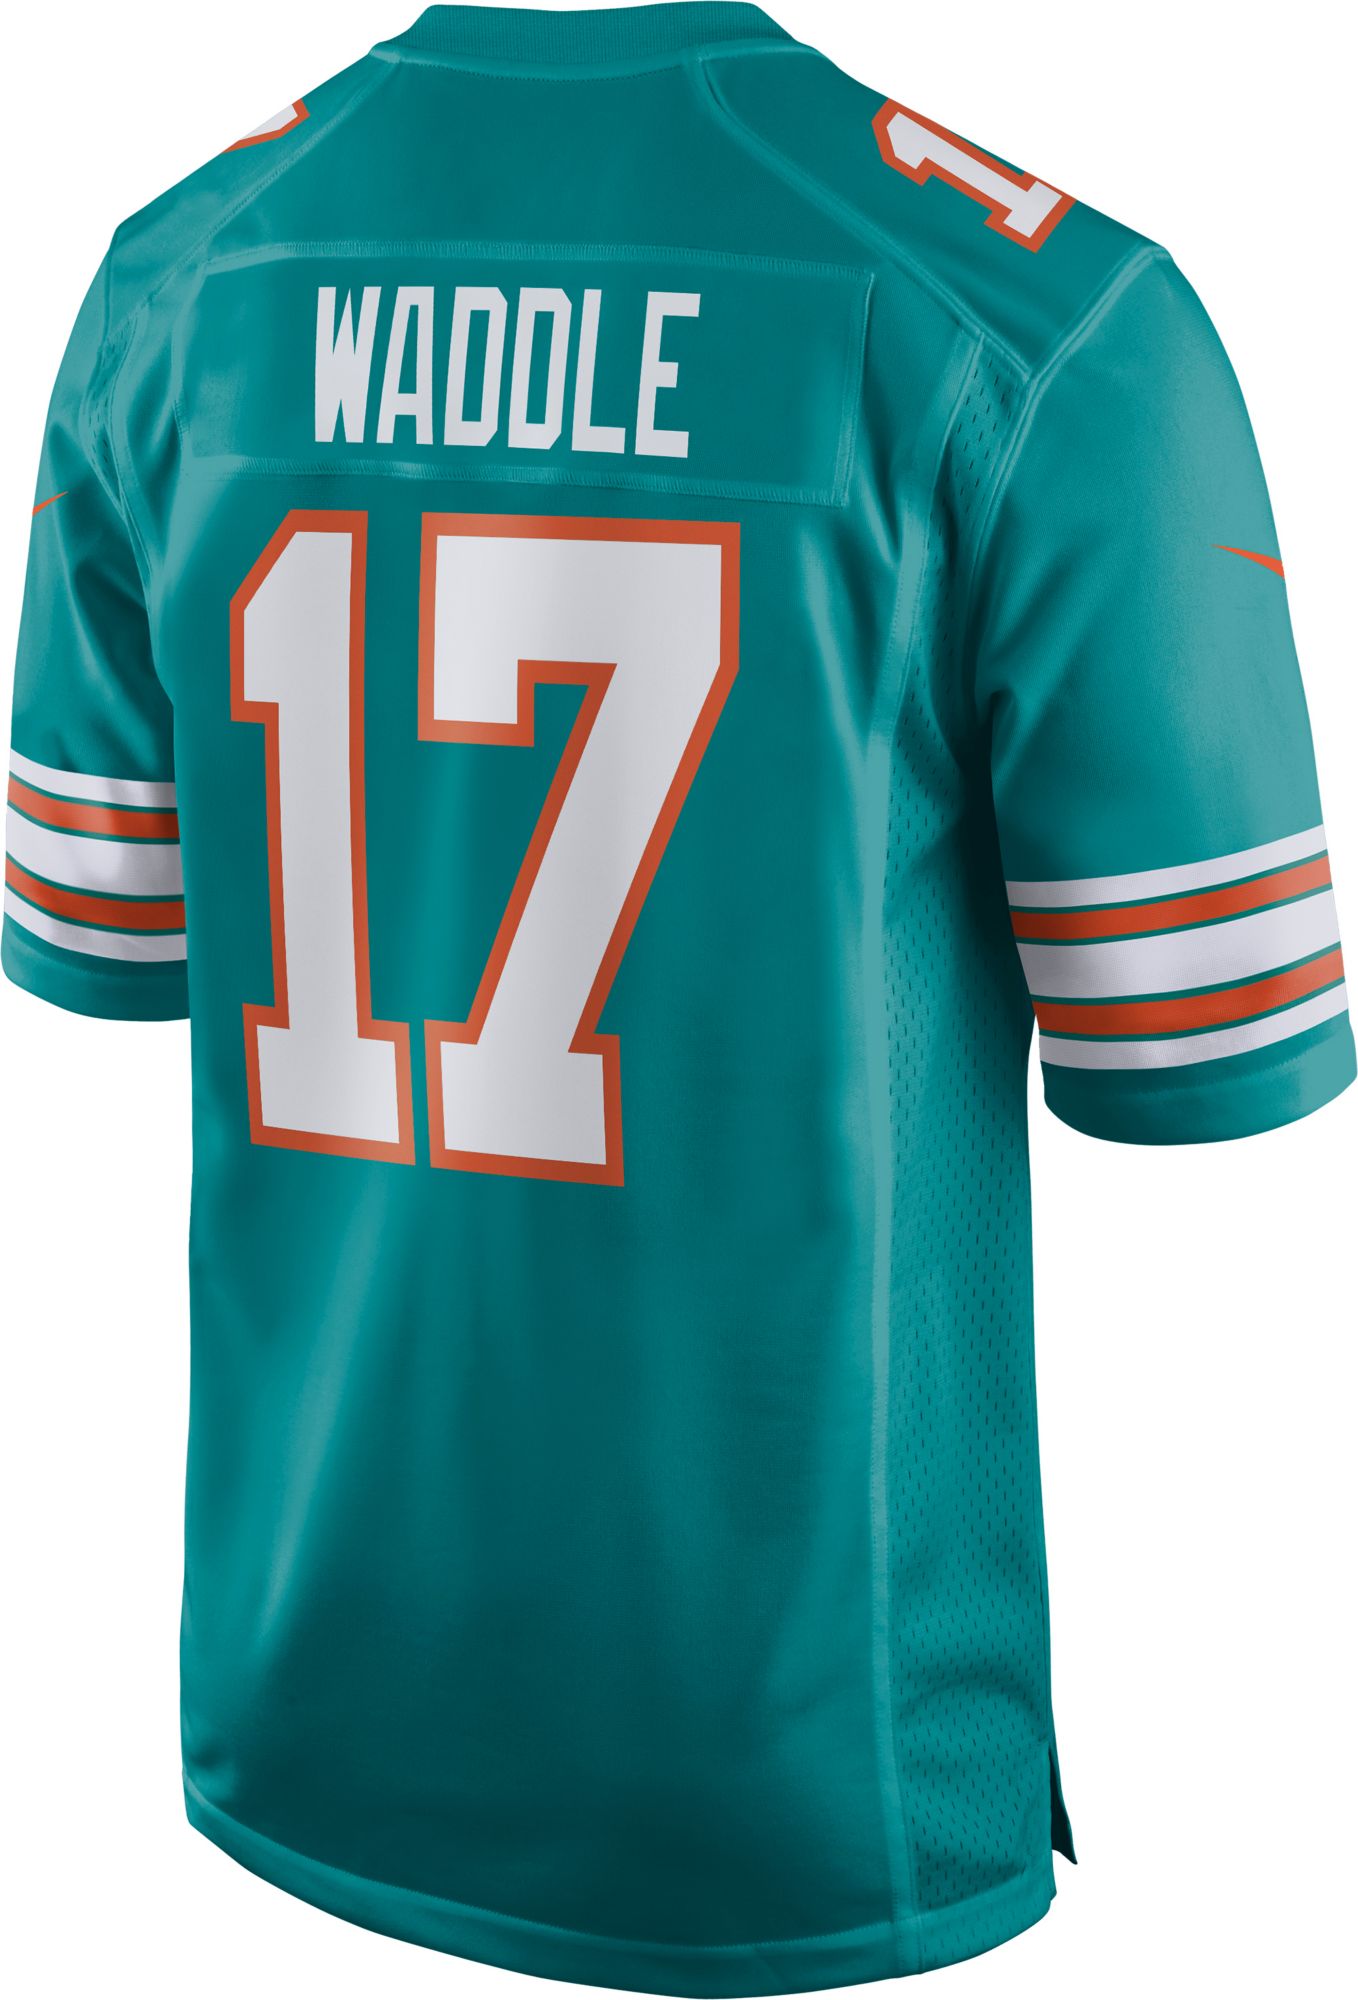 men's waddle jersey